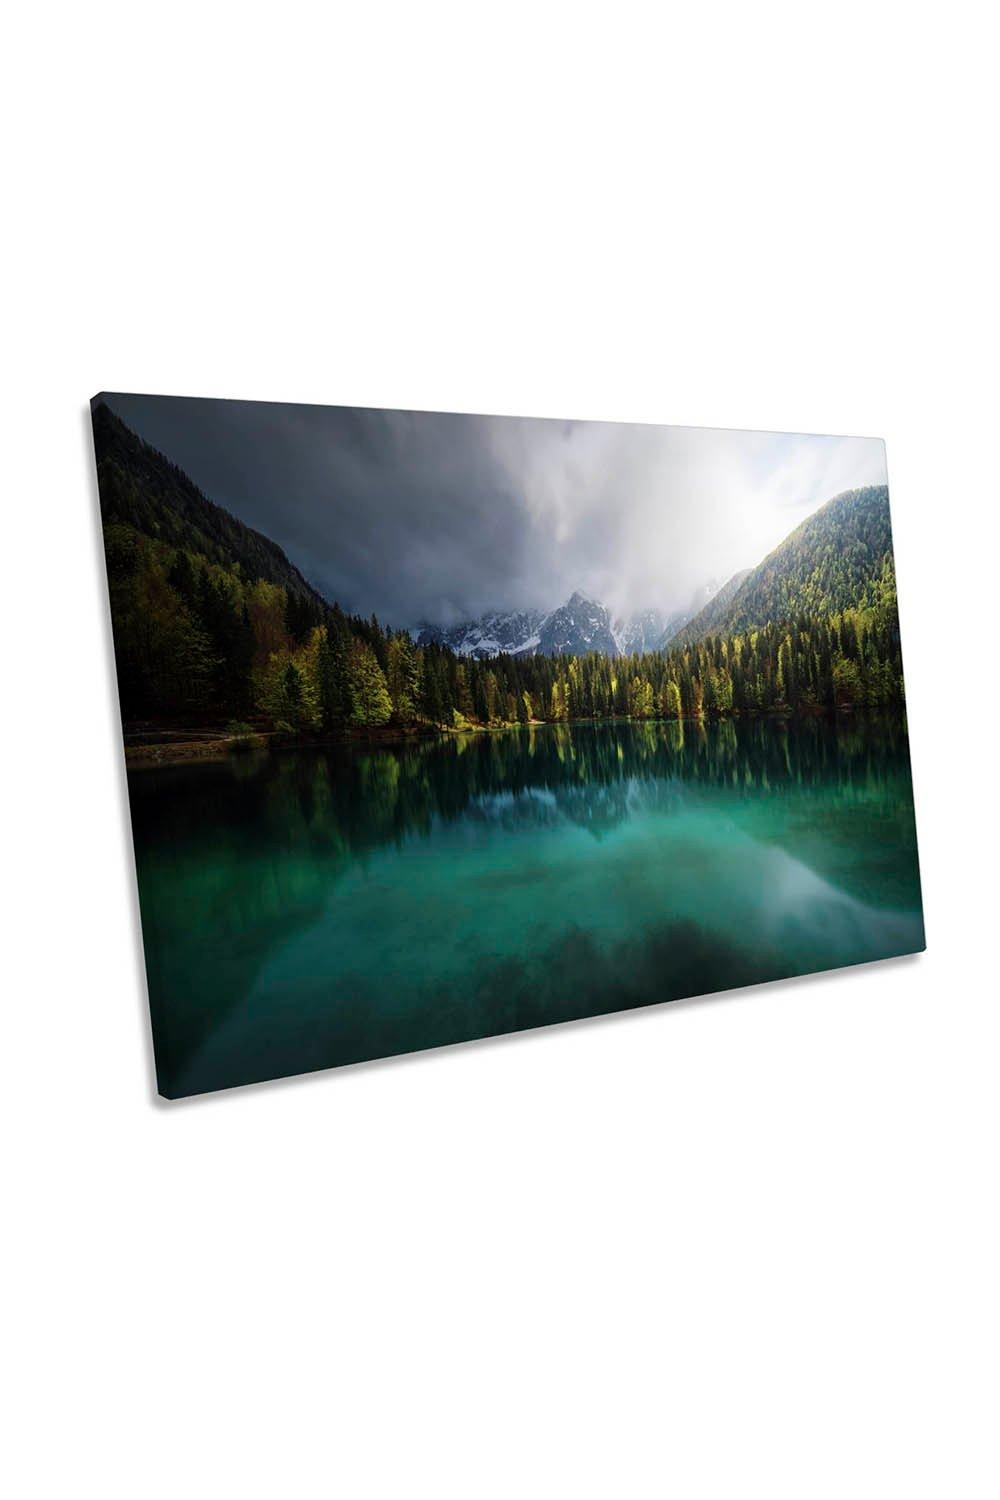 Menta Mountain Landscape Lake Italy Canvas Wall Art Picture Print